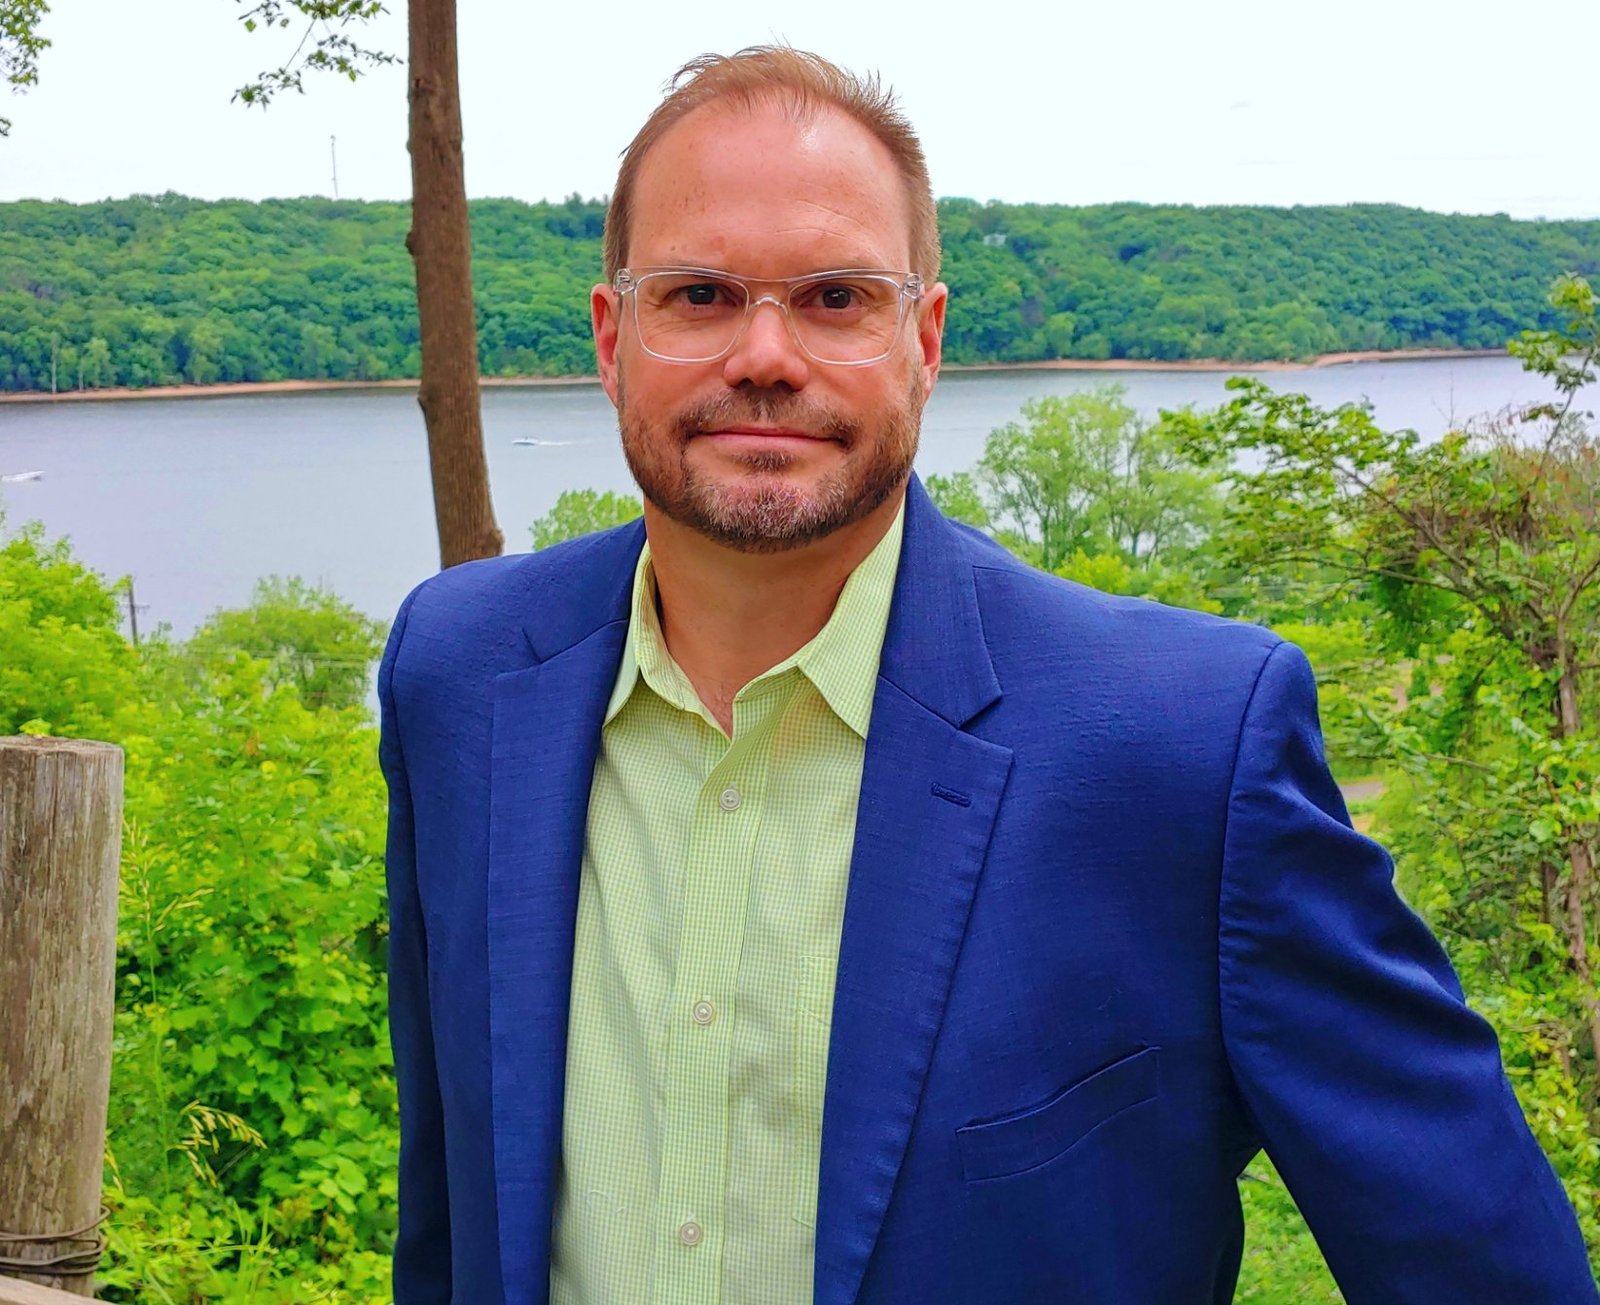 Photo of Darby Lunceford, a man in a light green shirt with a blue sports coat. Background is a scene with trees and a river.